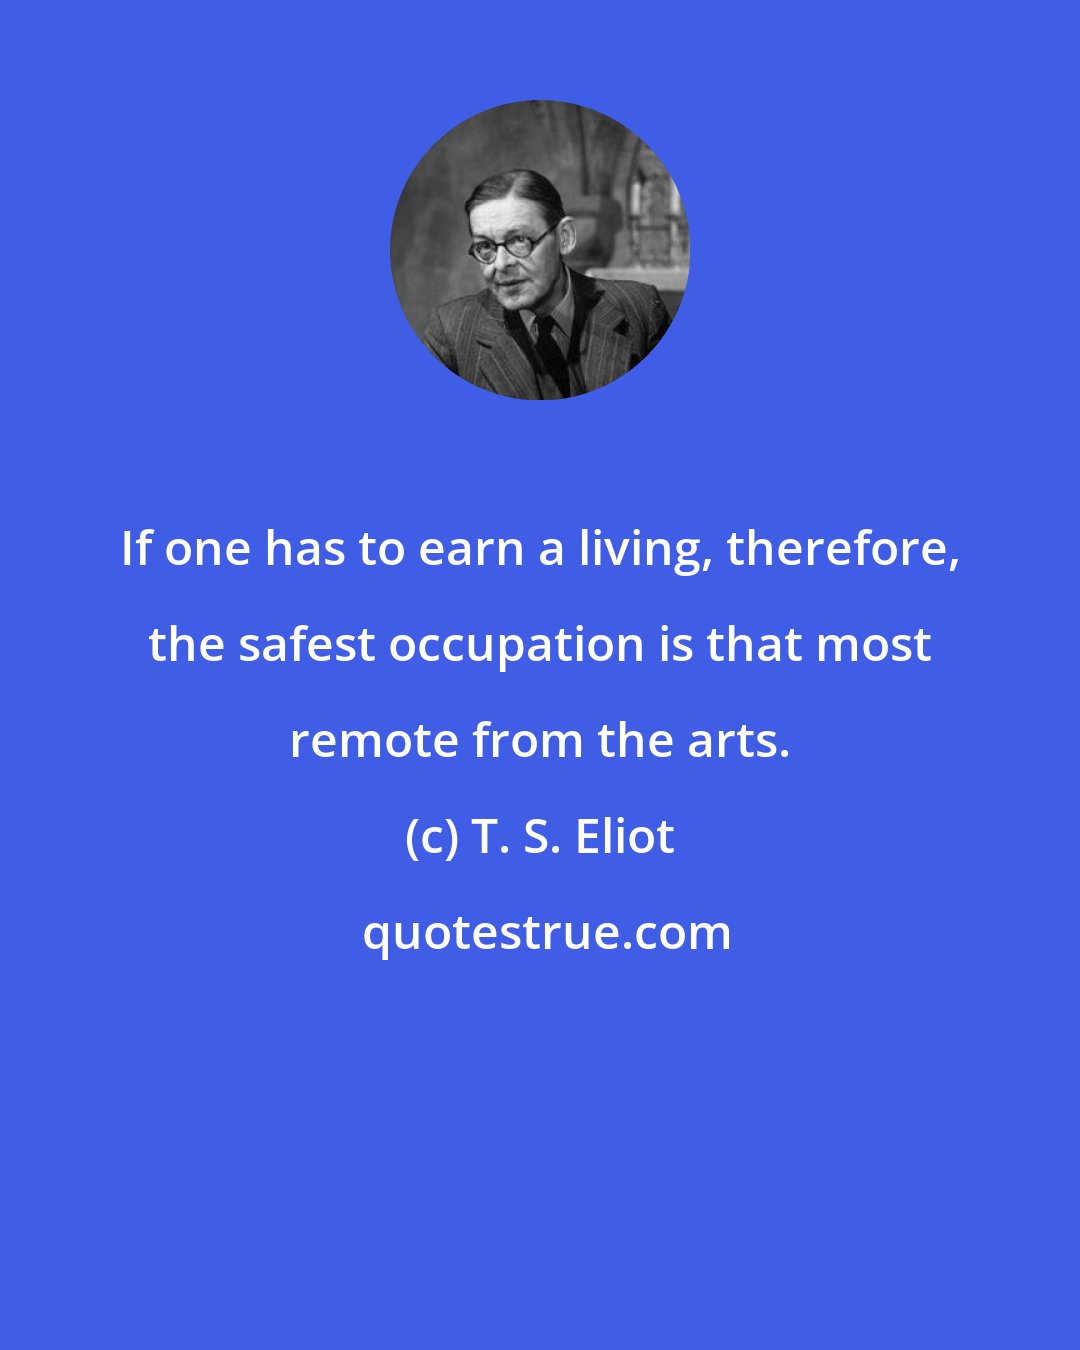 T. S. Eliot: If one has to earn a living, therefore, the safest occupation is that most remote from the arts.